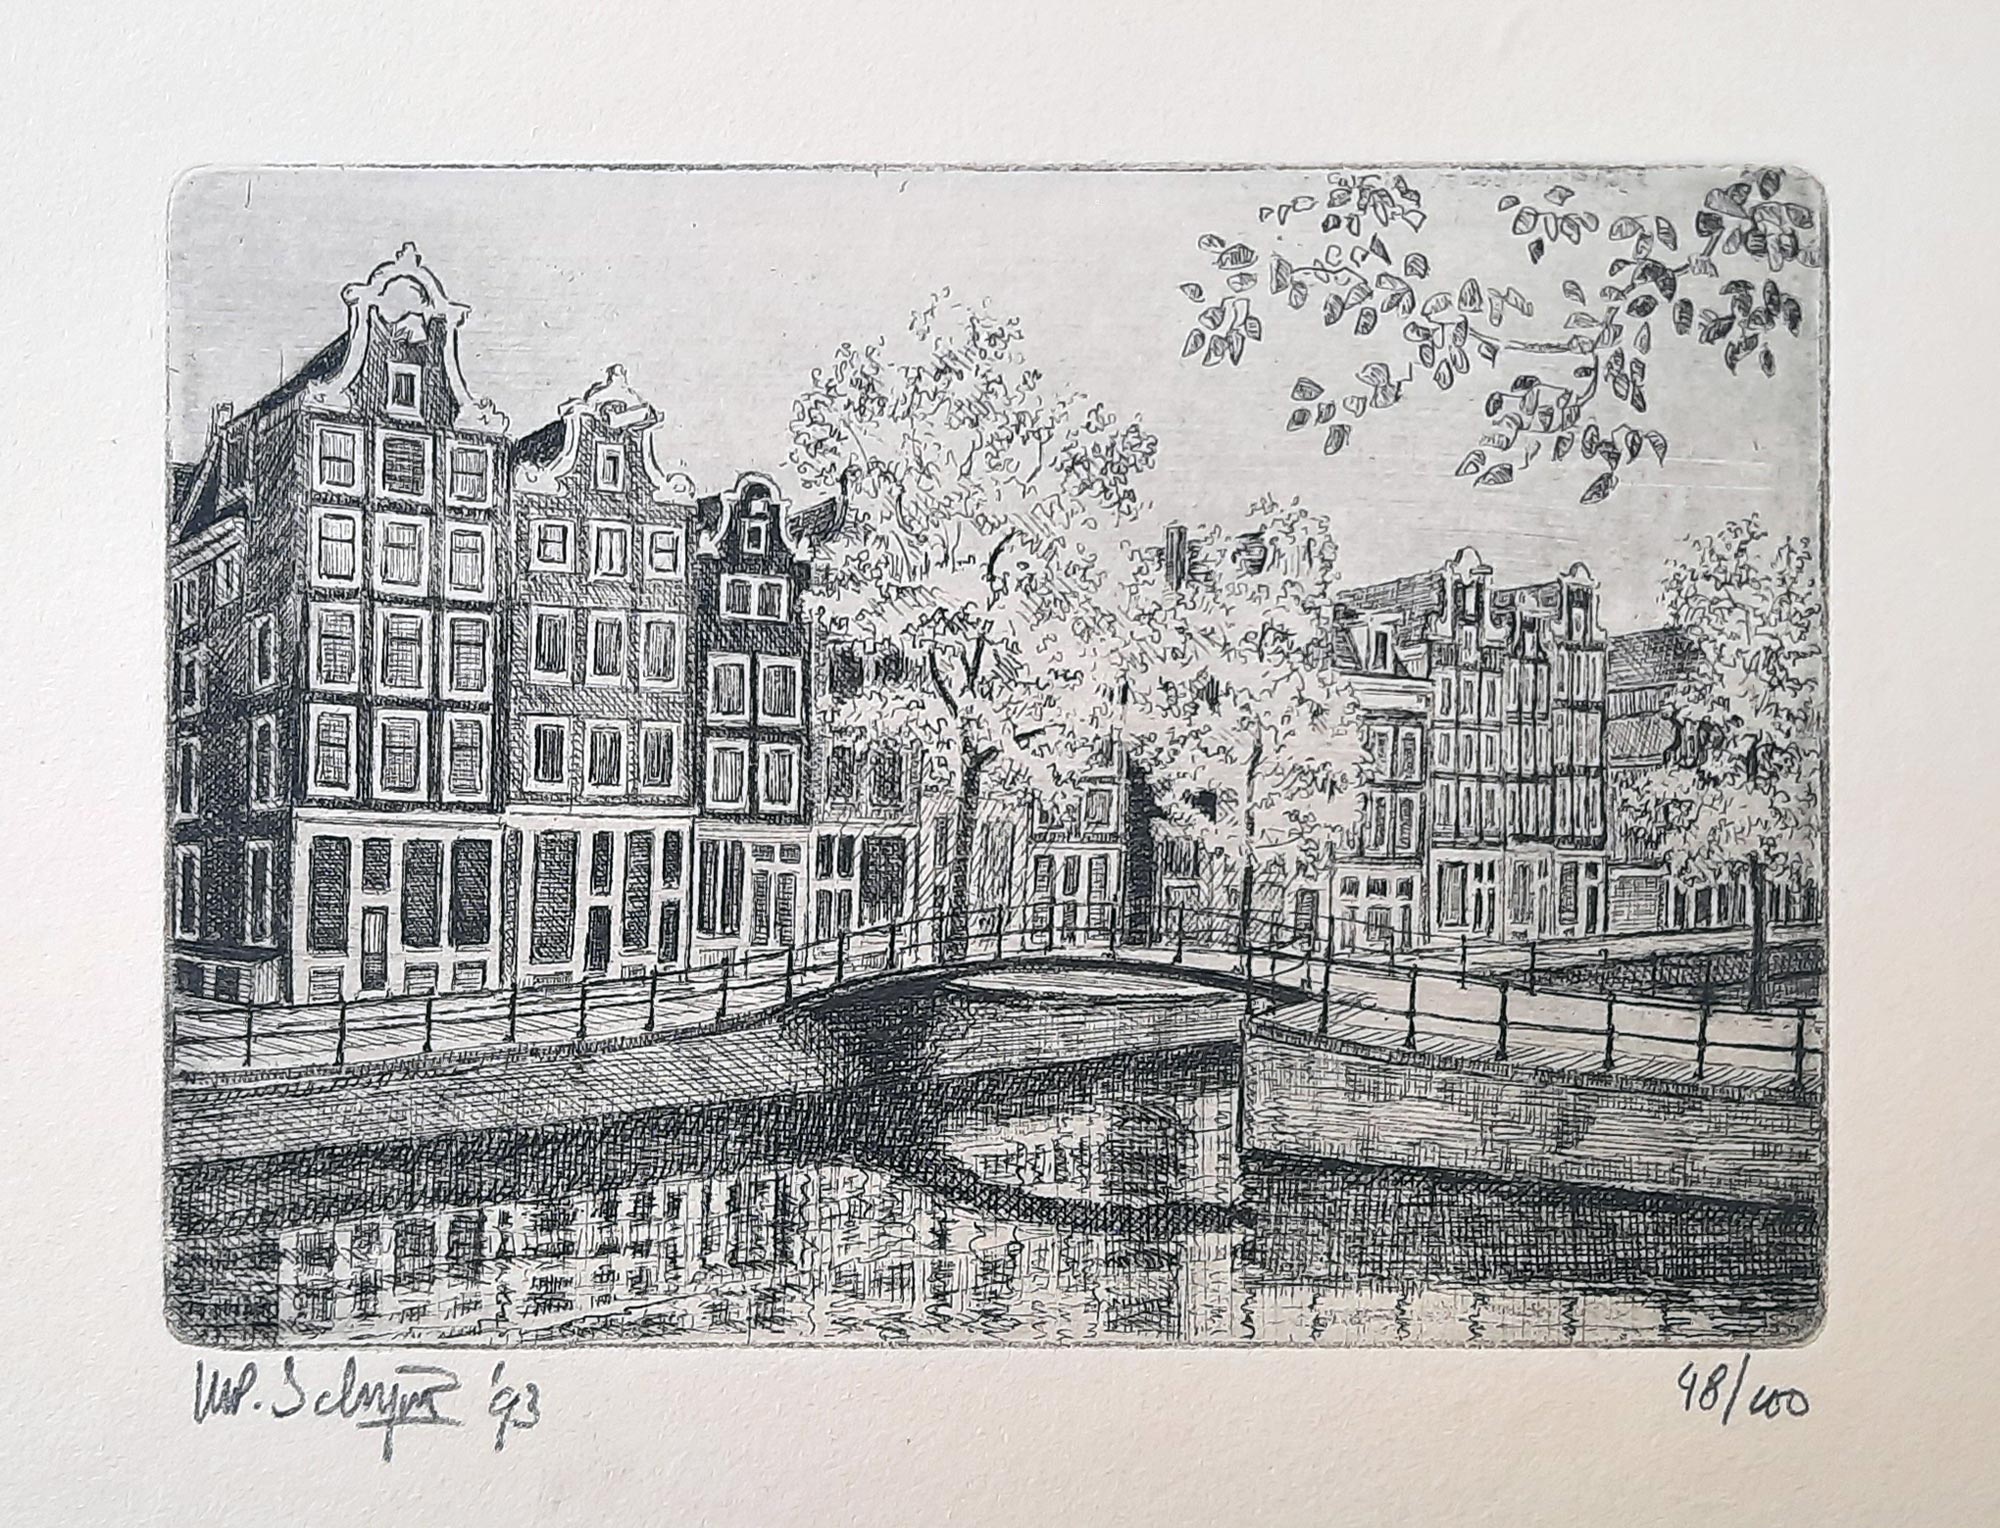 Featured image for “Gracht Amsterdam 50/100”